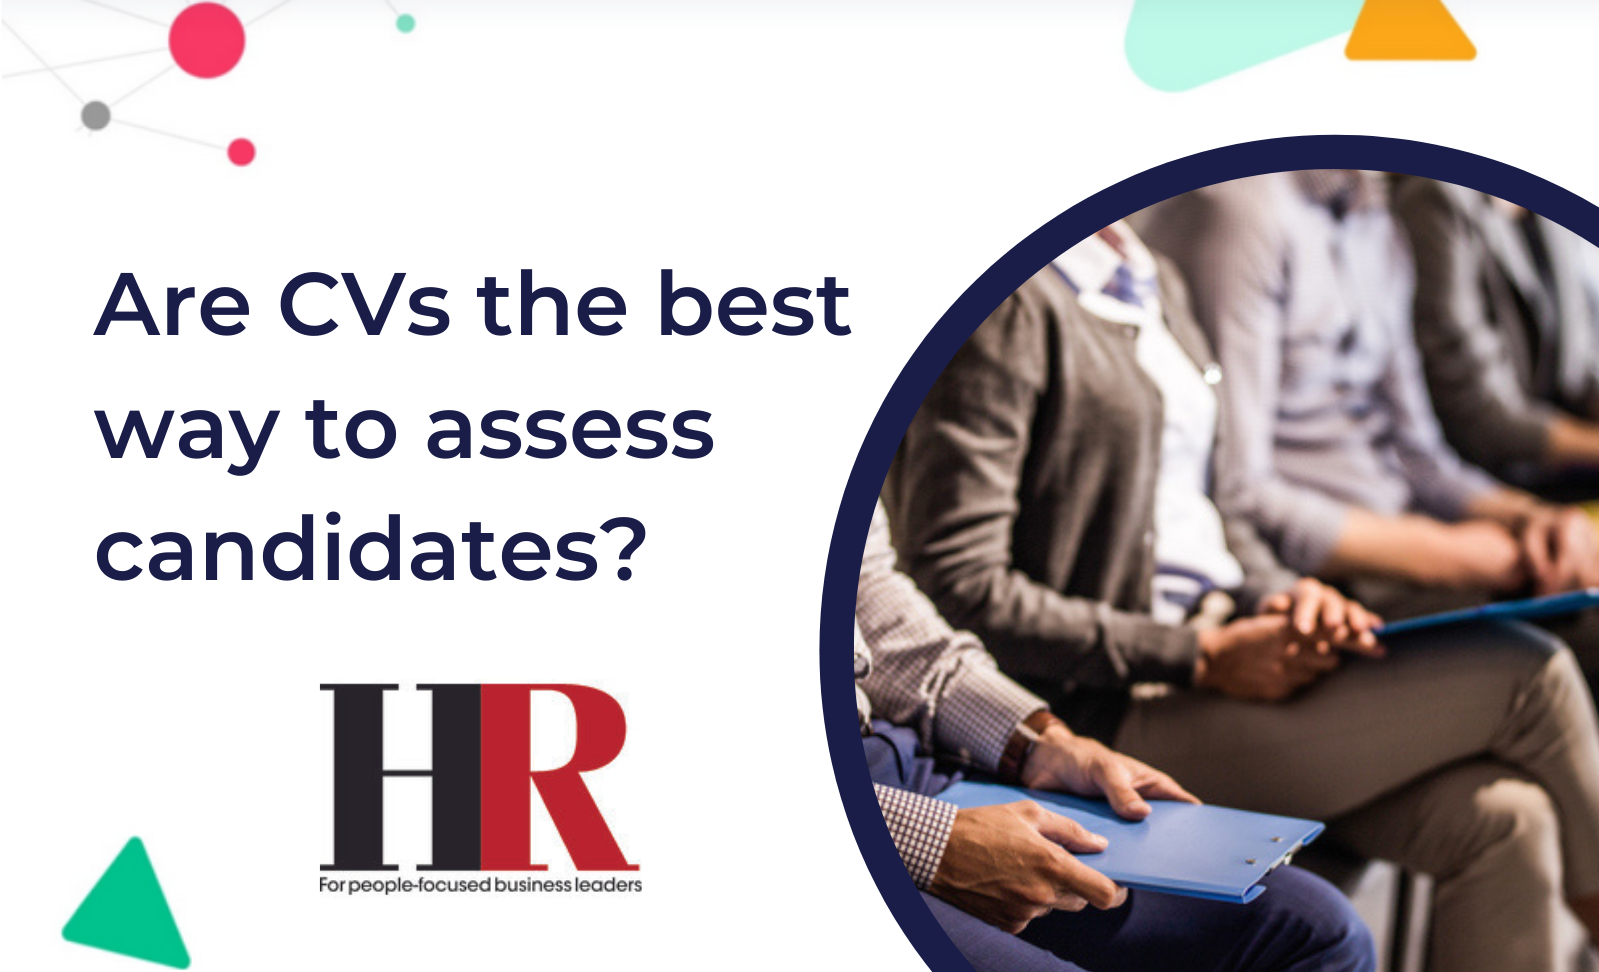 HR Magazine: Are CVs the best way to assess candidates?